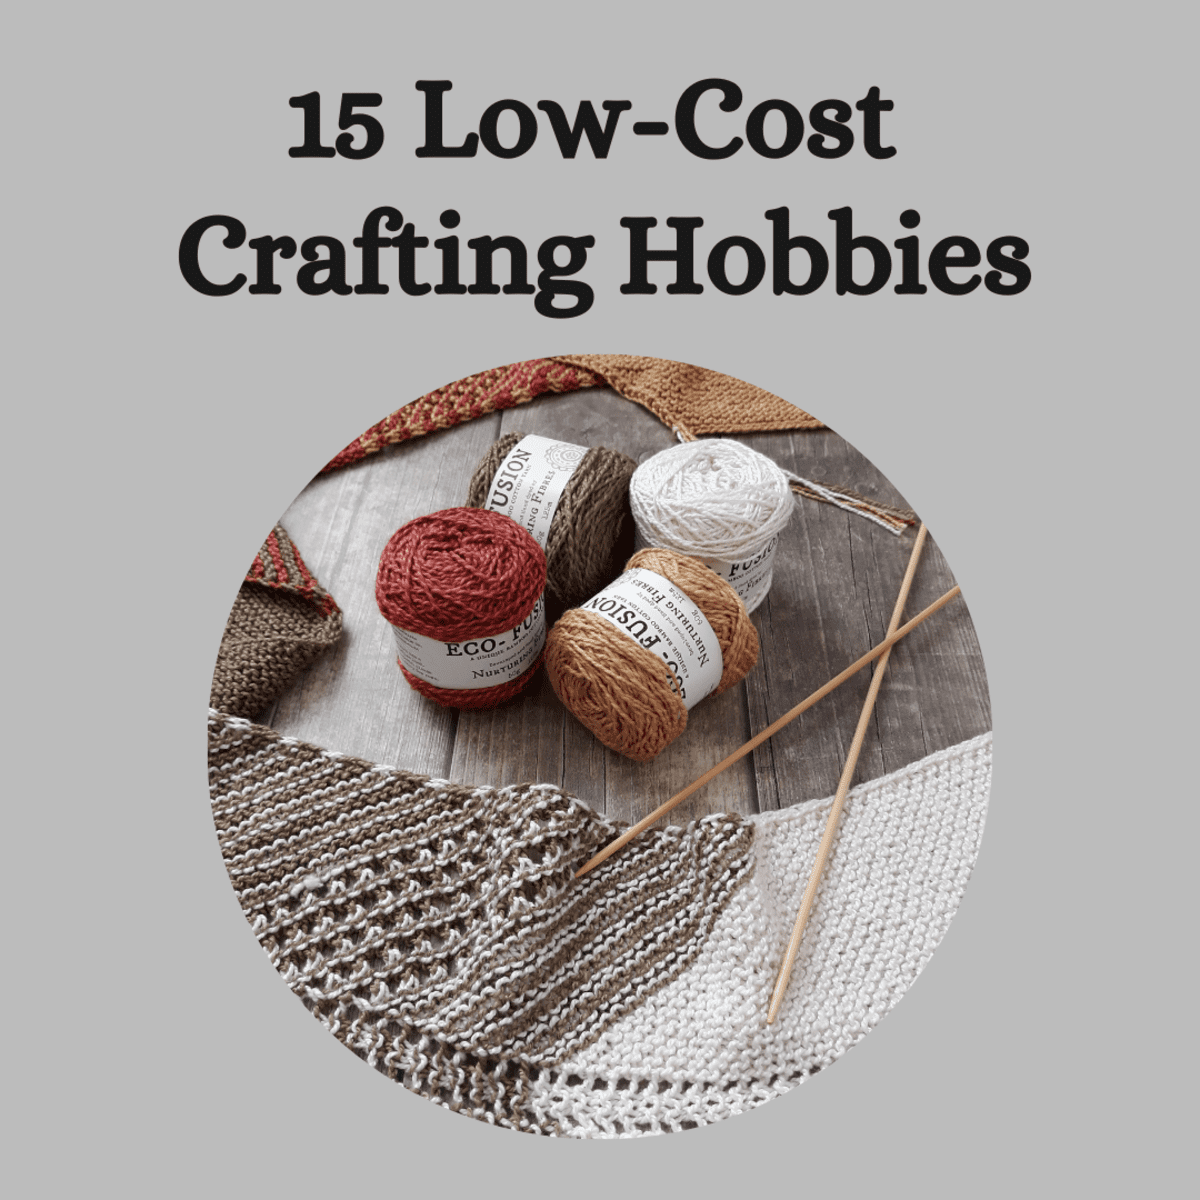 Paper Crafts and Crafting Hobbies to Inspire You